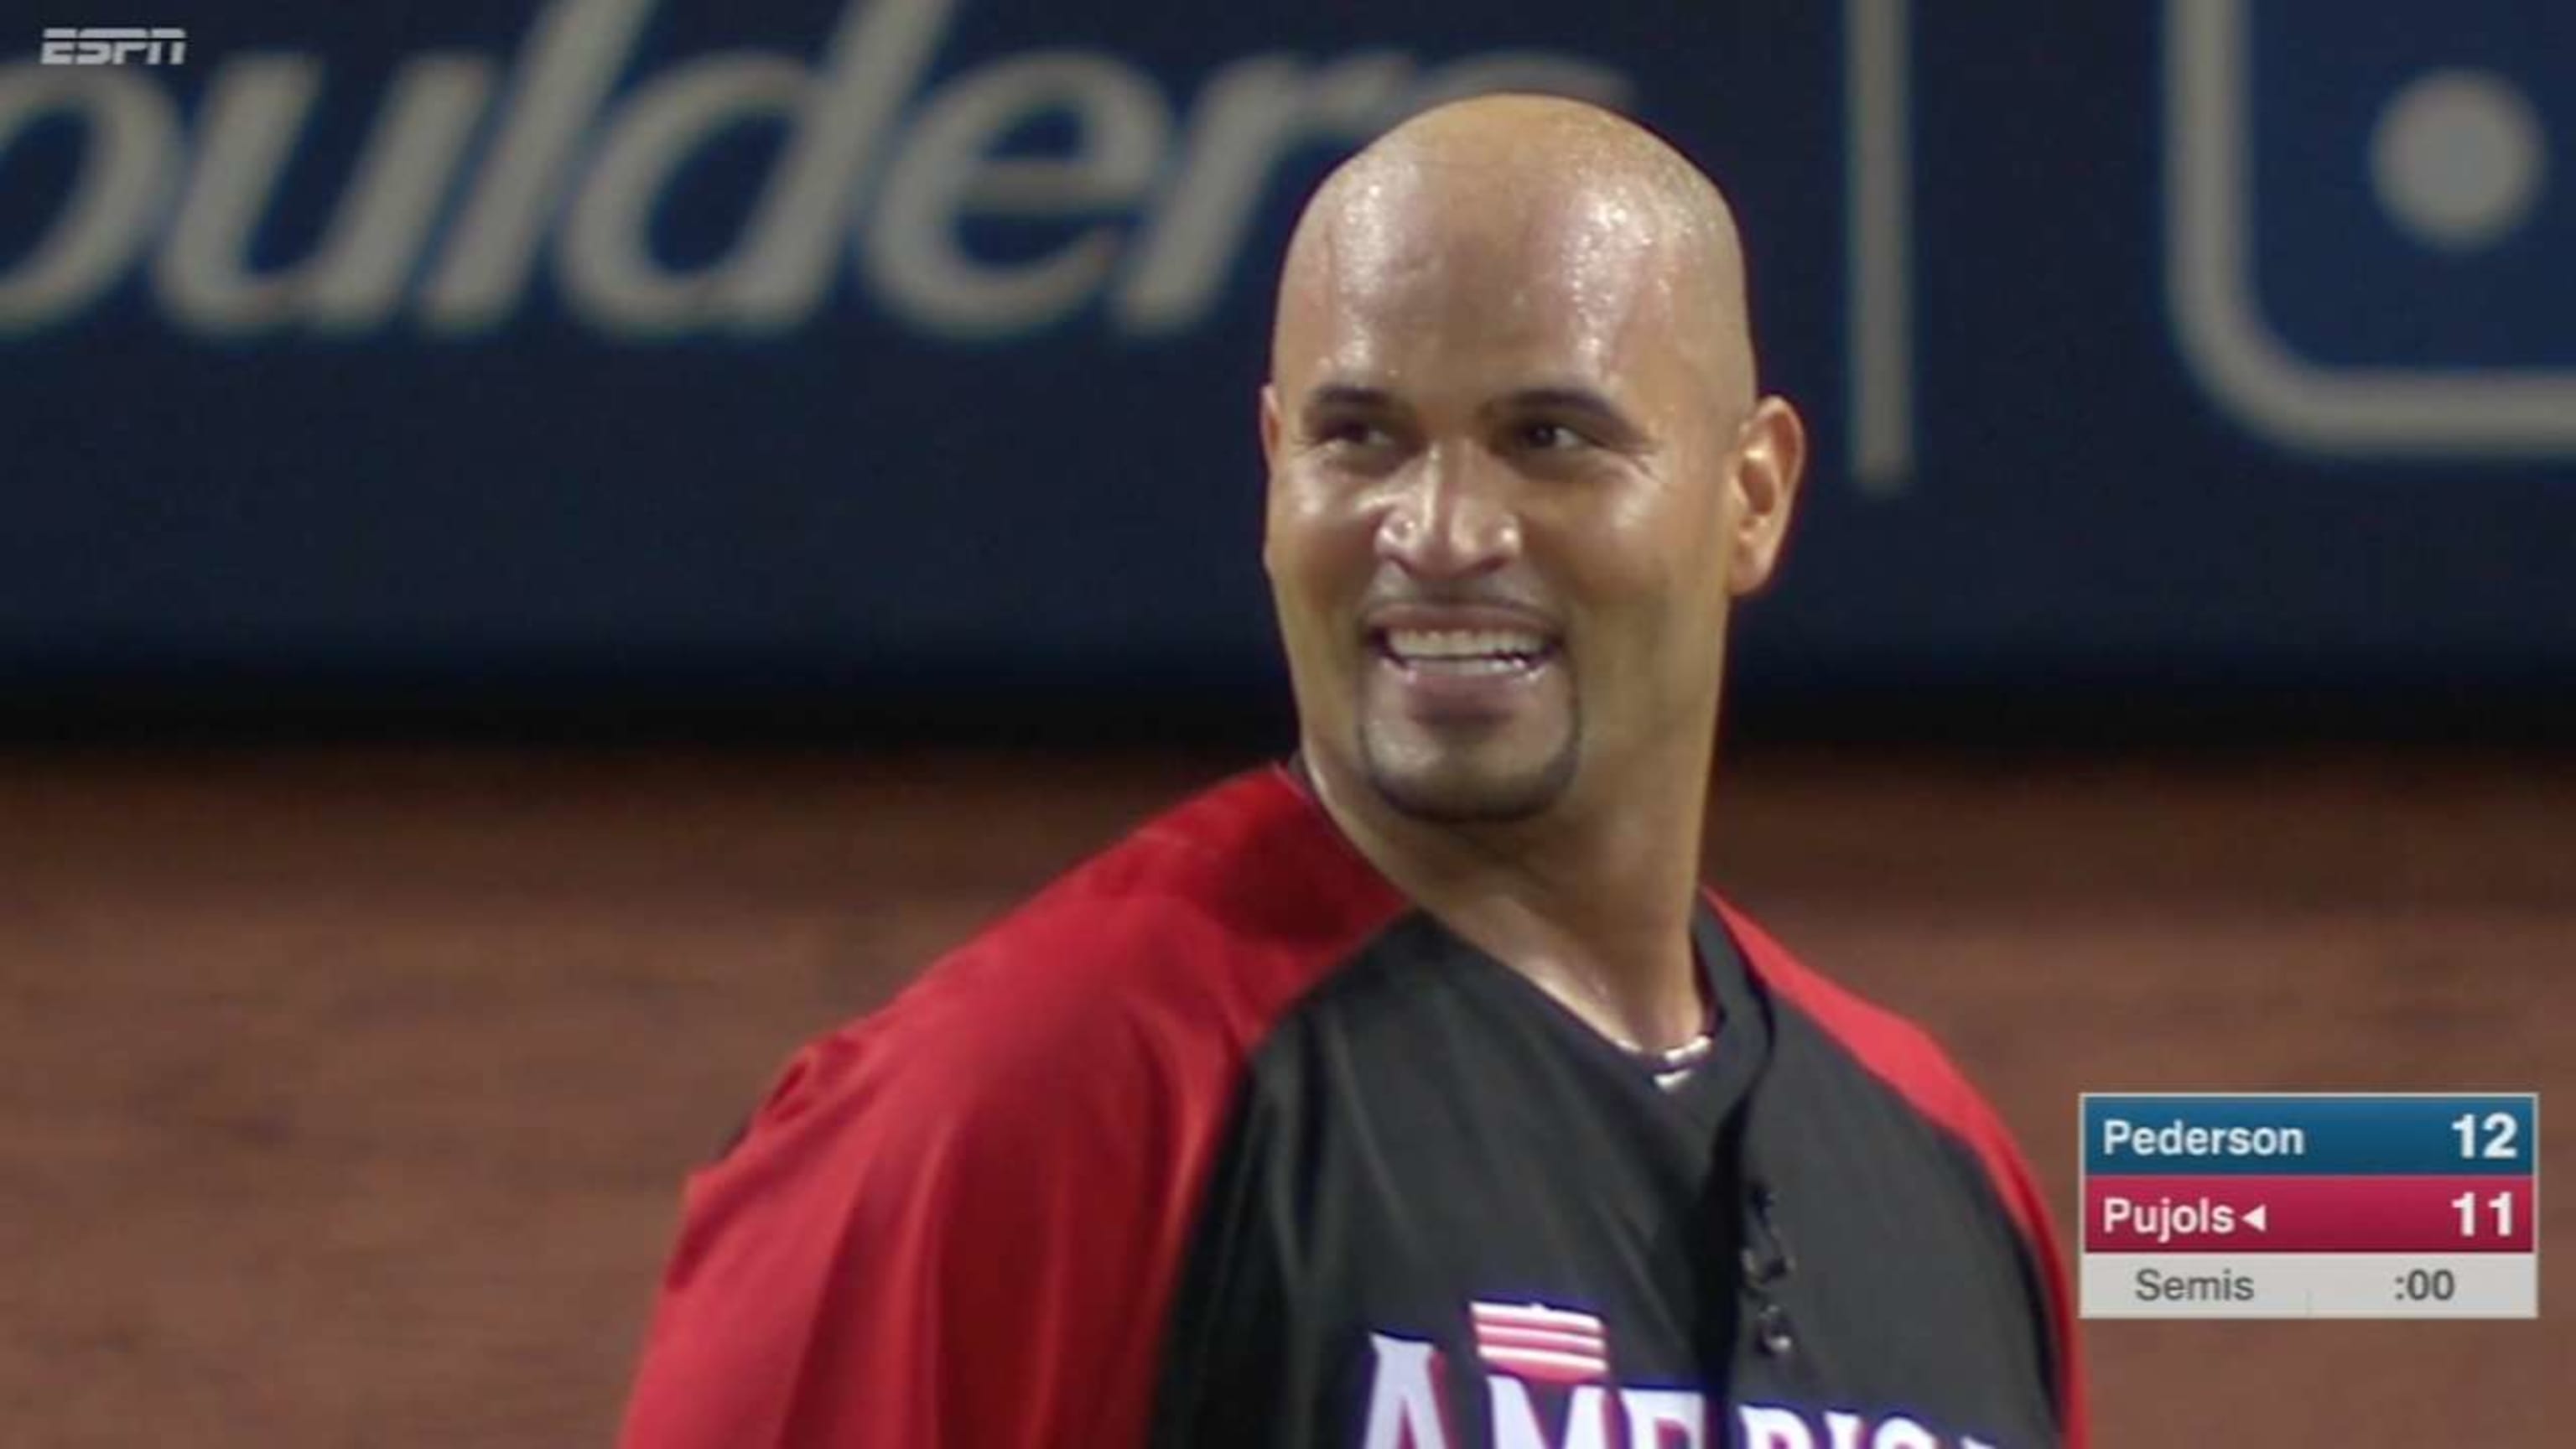 Alonso, Pujols, Acuña, Soto in for Home Run Derby - The San Diego